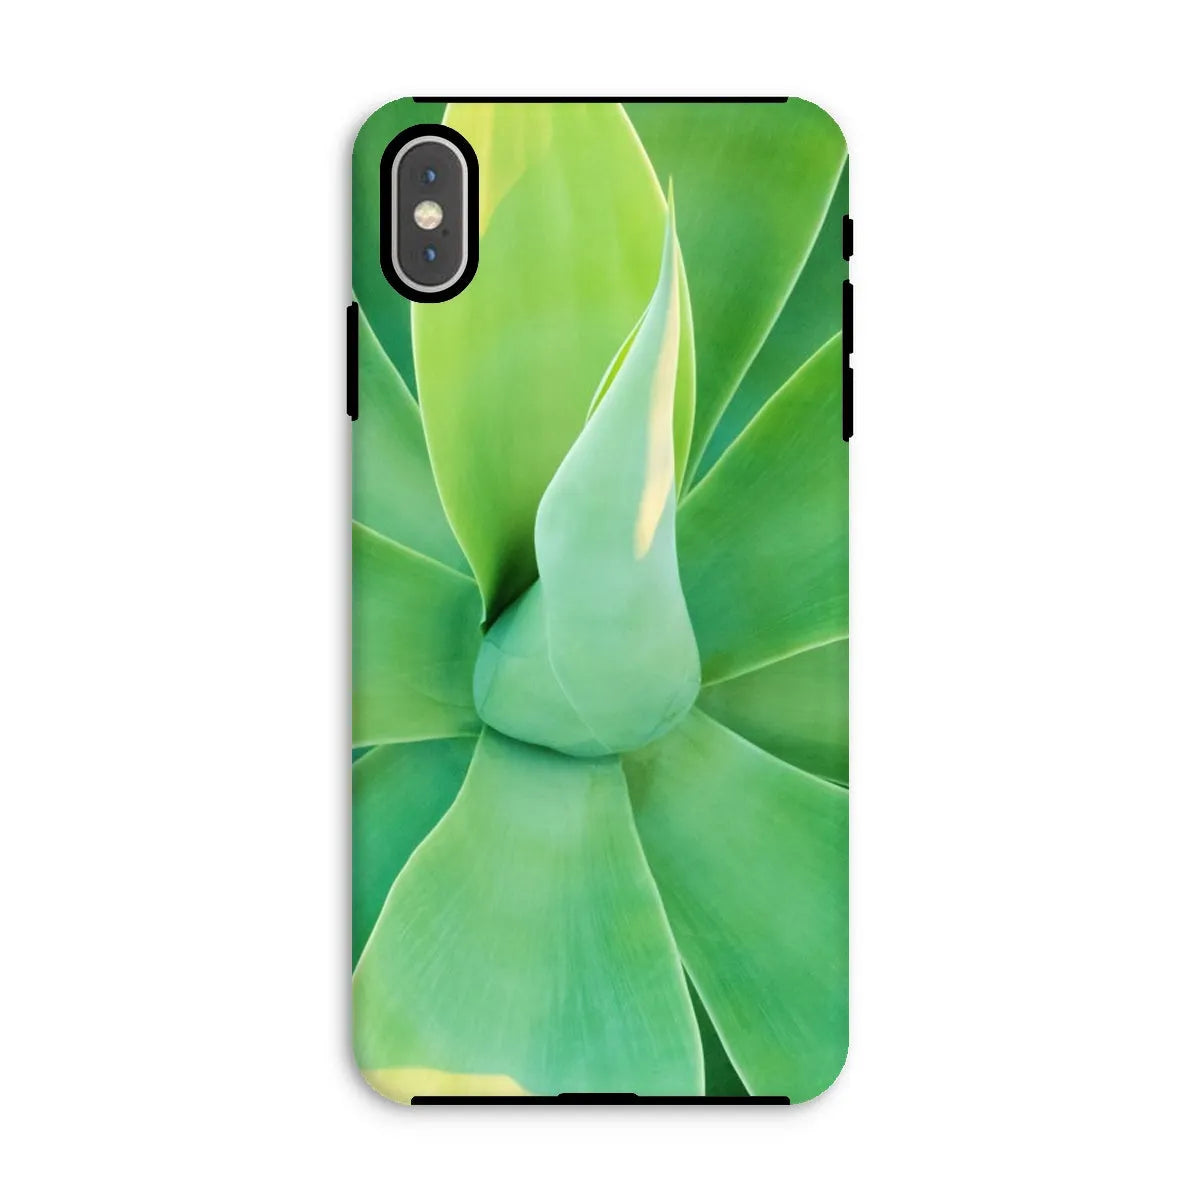 In Bloom Too Tough Phone Case - Iphone Xs Max / Matte - Mobile Phone Cases - Aesthetic Art